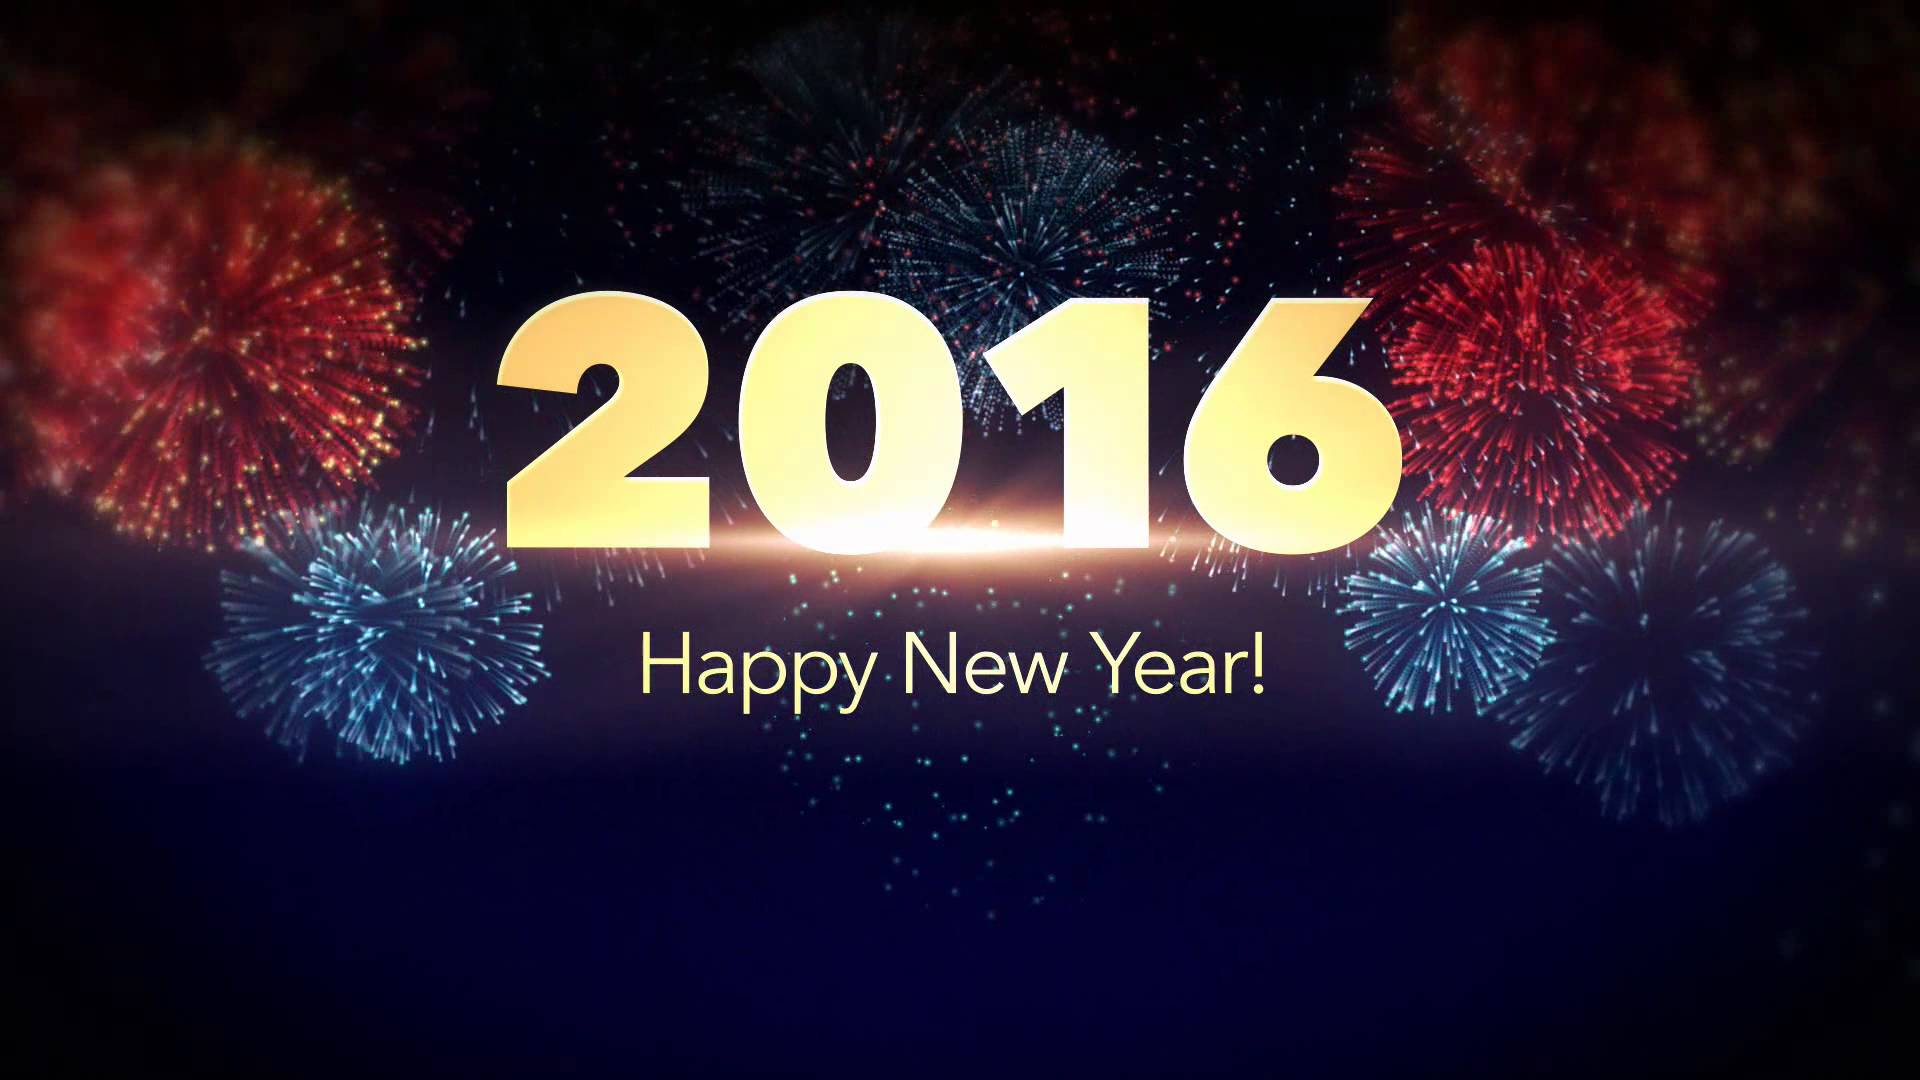 Beautiful Happy New Year Wallpapers HD (14)